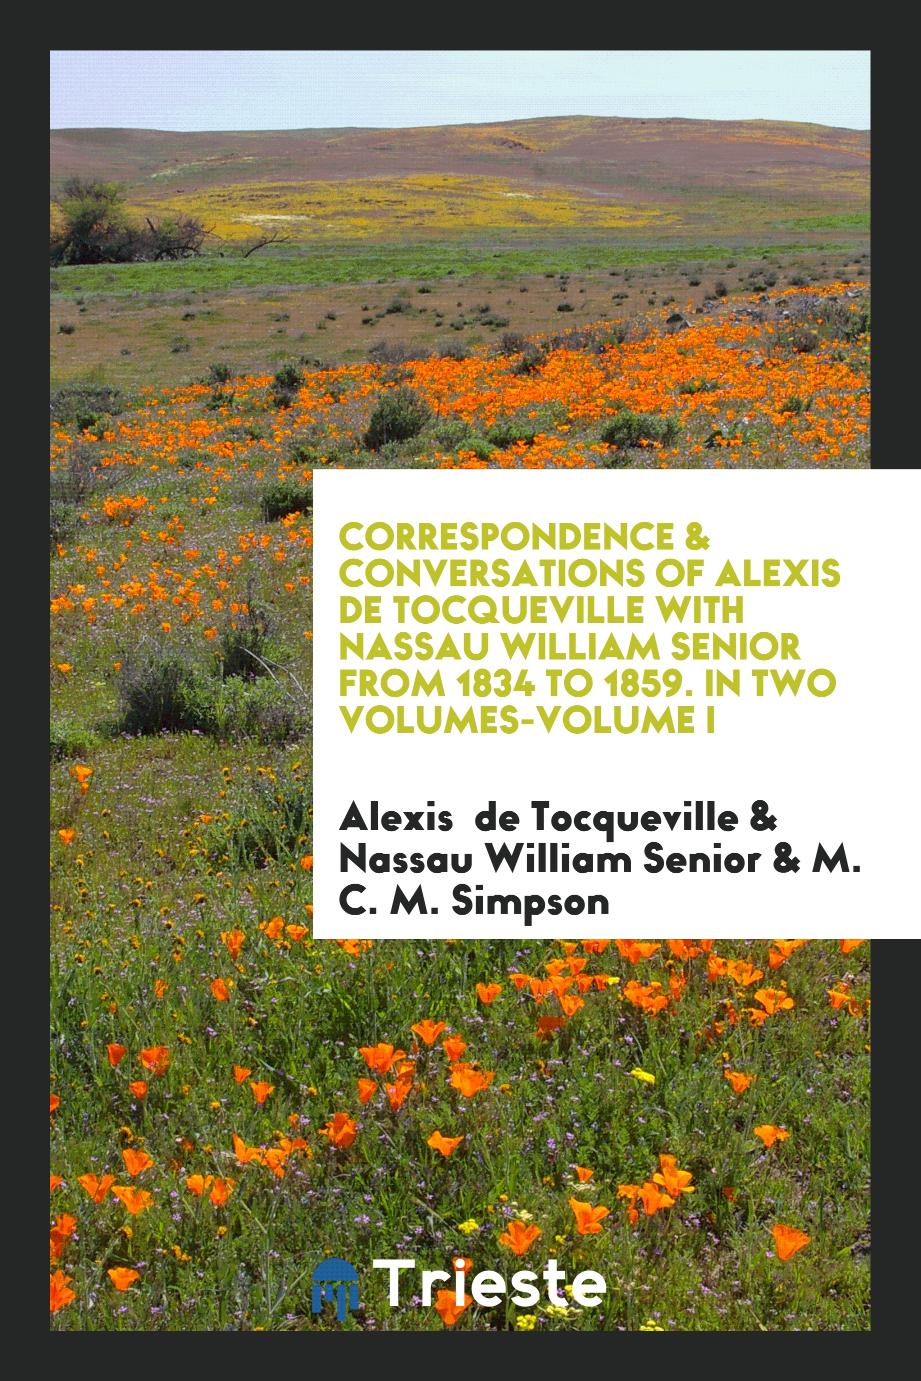 Correspondence & Conversations of Alexis de Tocqueville with Nassau William Senior from 1834 to 1859. In Two Volumes-Volume I